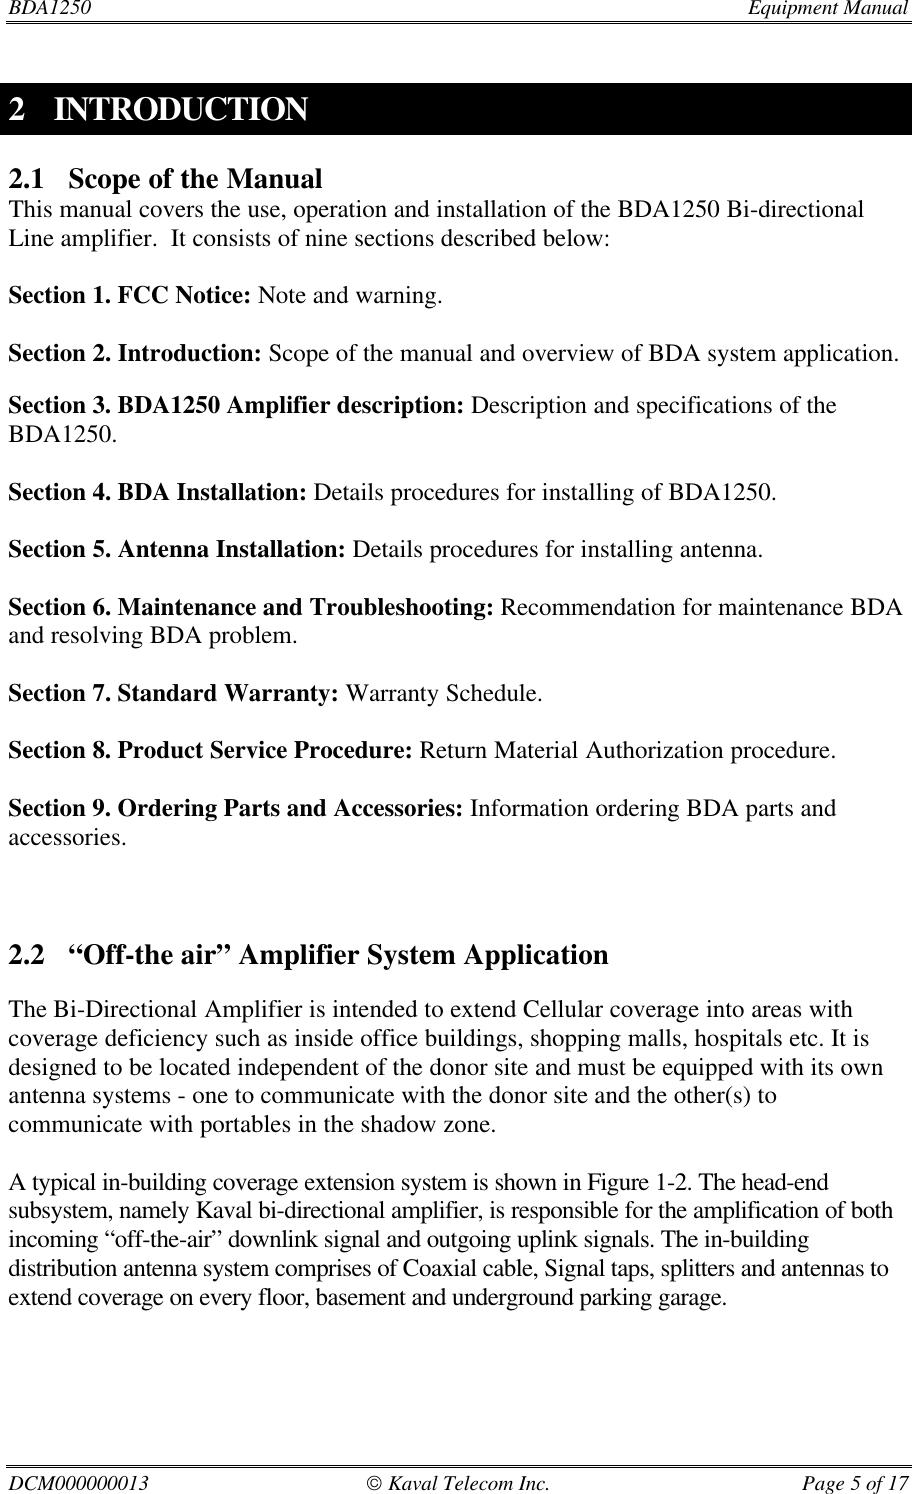 BDA1250  Equipment ManualDCM000000013  Kaval Telecom Inc. Page 5 of 172 INTRODUCTION2.1 Scope of the ManualThis manual covers the use, operation and installation of the BDA1250 Bi-directionalLine amplifier.  It consists of nine sections described below:Section 1. FCC Notice: Note and warning.Section 2. Introduction: Scope of the manual and overview of BDA system application.Section 3. BDA1250 Amplifier description: Description and specifications of theBDA1250.Section 4. BDA Installation: Details procedures for installing of BDA1250.Section 5. Antenna Installation: Details procedures for installing antenna.Section 6. Maintenance and Troubleshooting: Recommendation for maintenance BDAand resolving BDA problem.Section 7. Standard Warranty: Warranty Schedule.Section 8. Product Service Procedure: Return Material Authorization procedure.Section 9. Ordering Parts and Accessories: Information ordering BDA parts andaccessories.2.2 “Off-the air” Amplifier System ApplicationThe Bi-Directional Amplifier is intended to extend Cellular coverage into areas withcoverage deficiency such as inside office buildings, shopping malls, hospitals etc. It isdesigned to be located independent of the donor site and must be equipped with its ownantenna systems - one to communicate with the donor site and the other(s) tocommunicate with portables in the shadow zone.A typical in-building coverage extension system is shown in Figure 1-2. The head-endsubsystem, namely Kaval bi-directional amplifier, is responsible for the amplification of bothincoming “off-the-air” downlink signal and outgoing uplink signals. The in-buildingdistribution antenna system comprises of Coaxial cable, Signal taps, splitters and antennas toextend coverage on every floor, basement and underground parking garage.